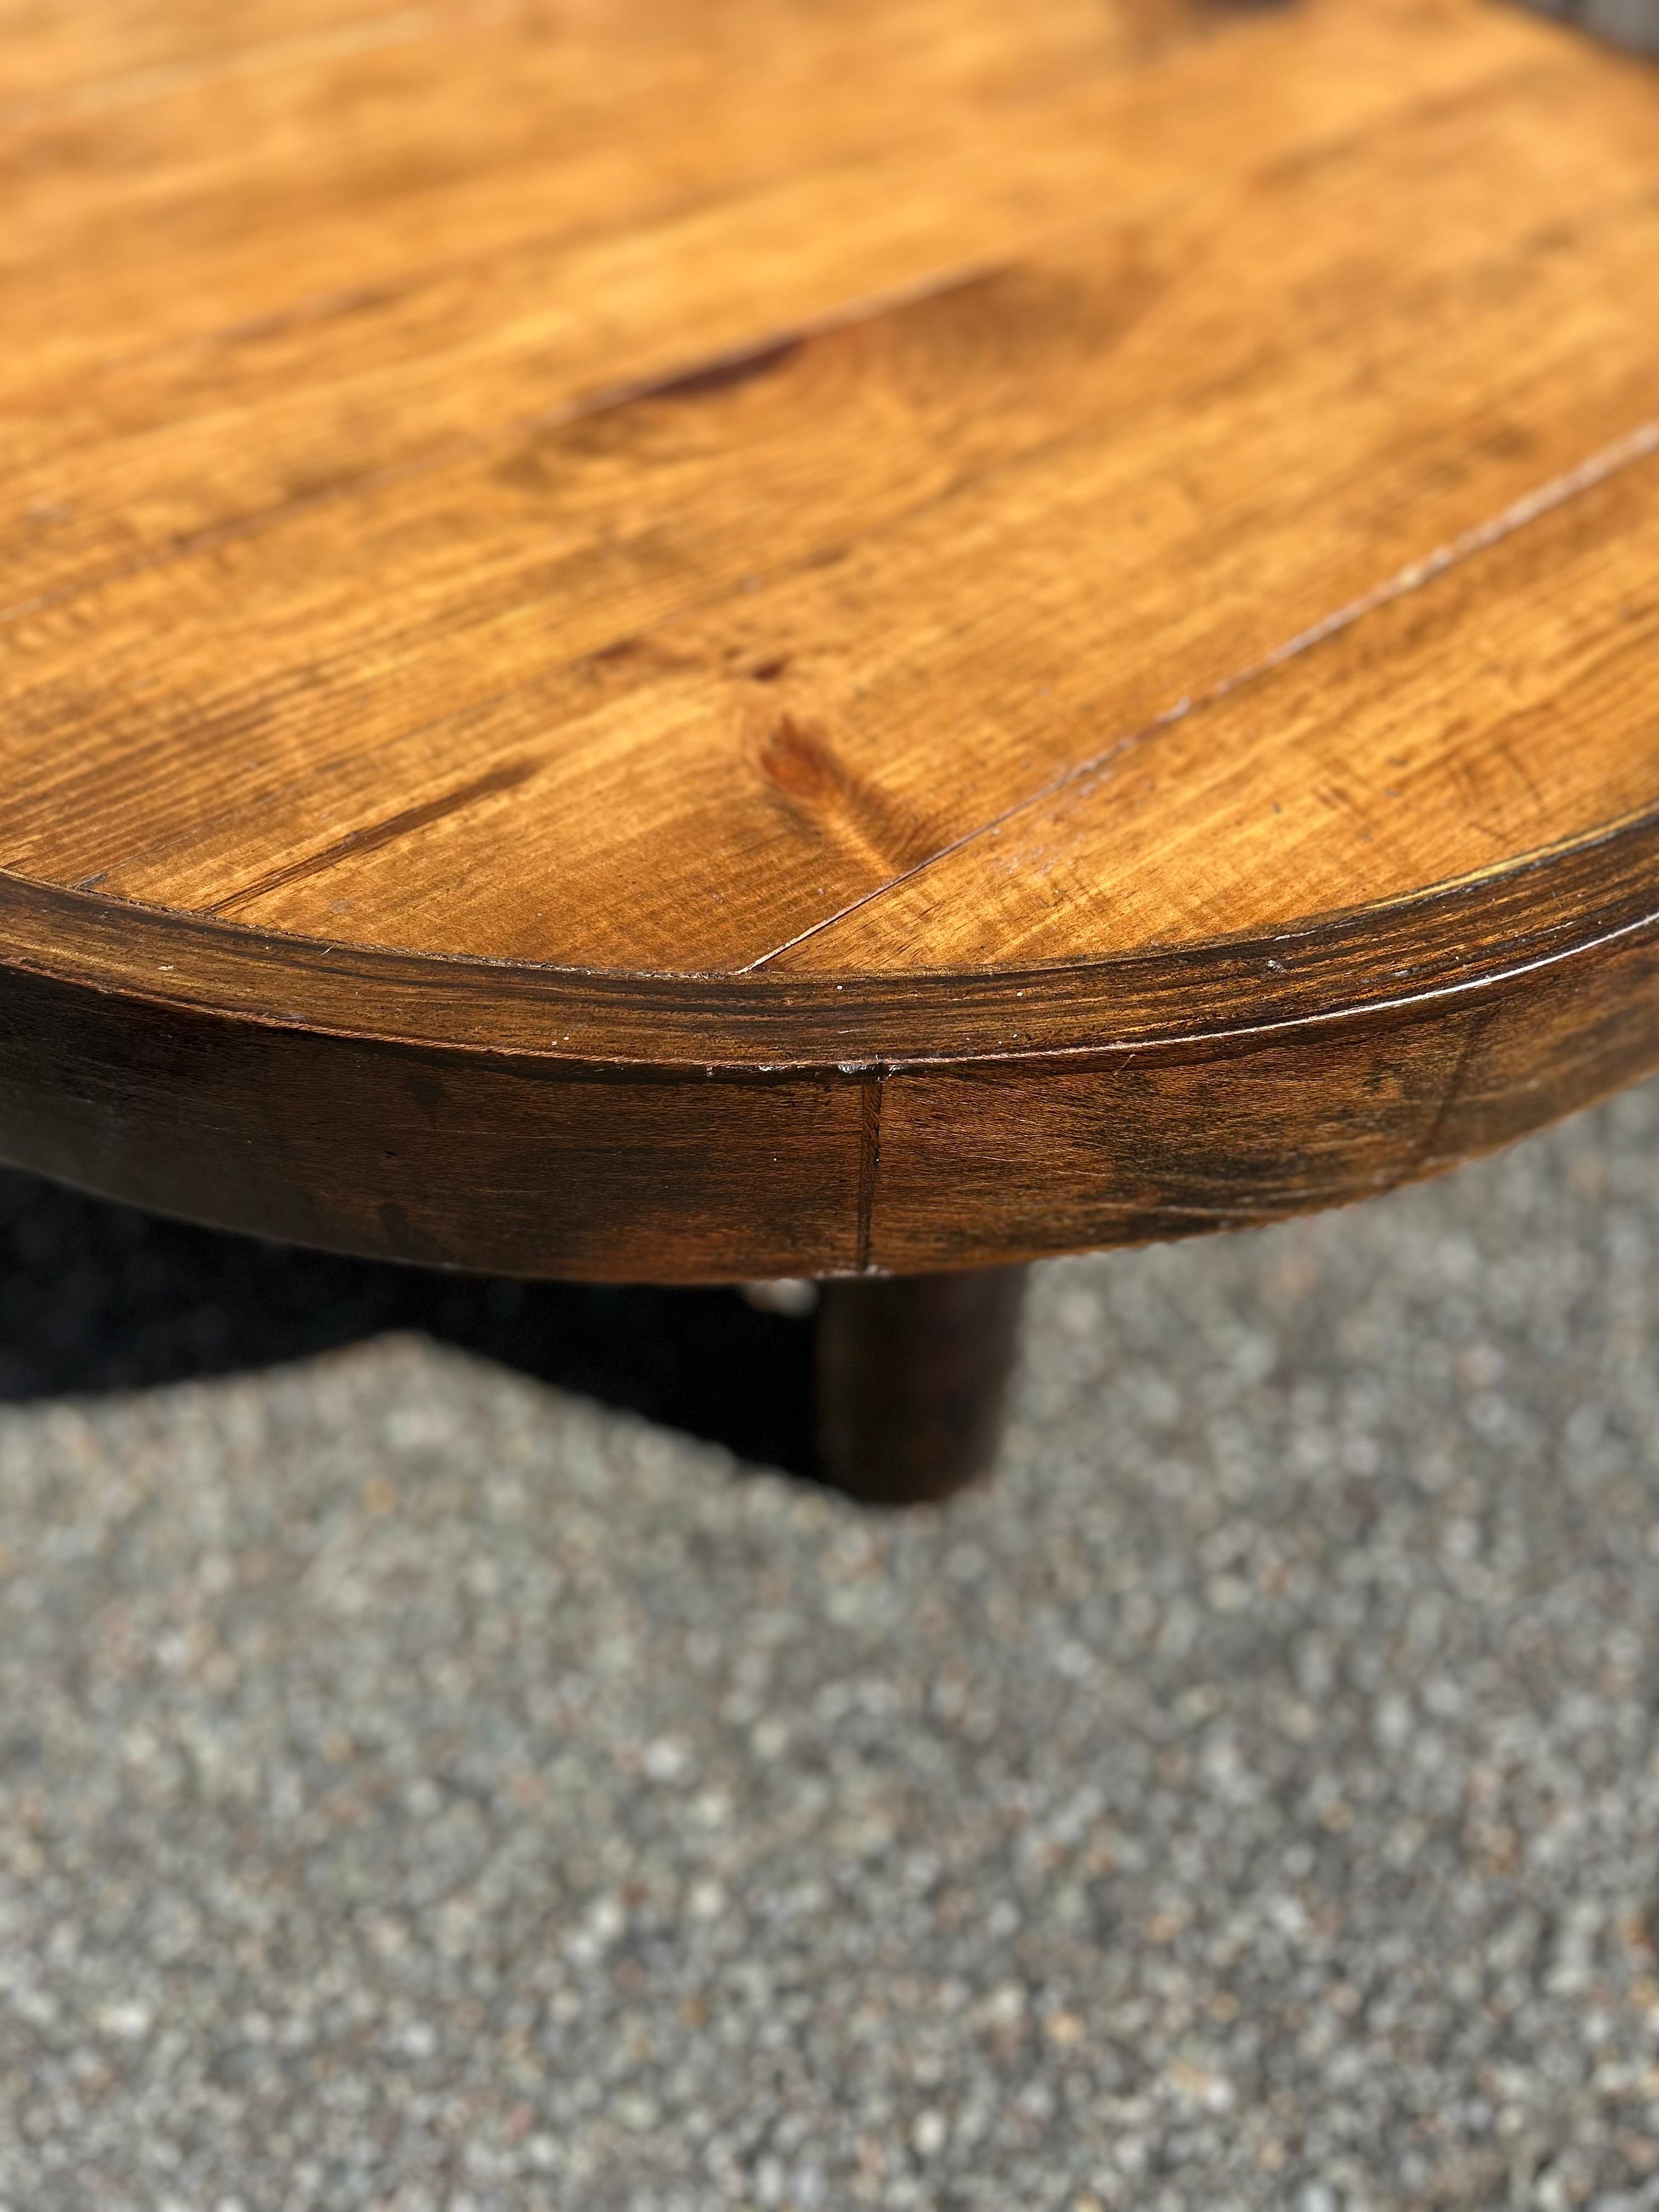 Hand crafted French mid century sofa/ coffe table in beautifully stained wood with an edge of stained solid beech wood, the table has beautiful round legs also made of solid beech.
The height of the table makes it perfect for any type of lounge